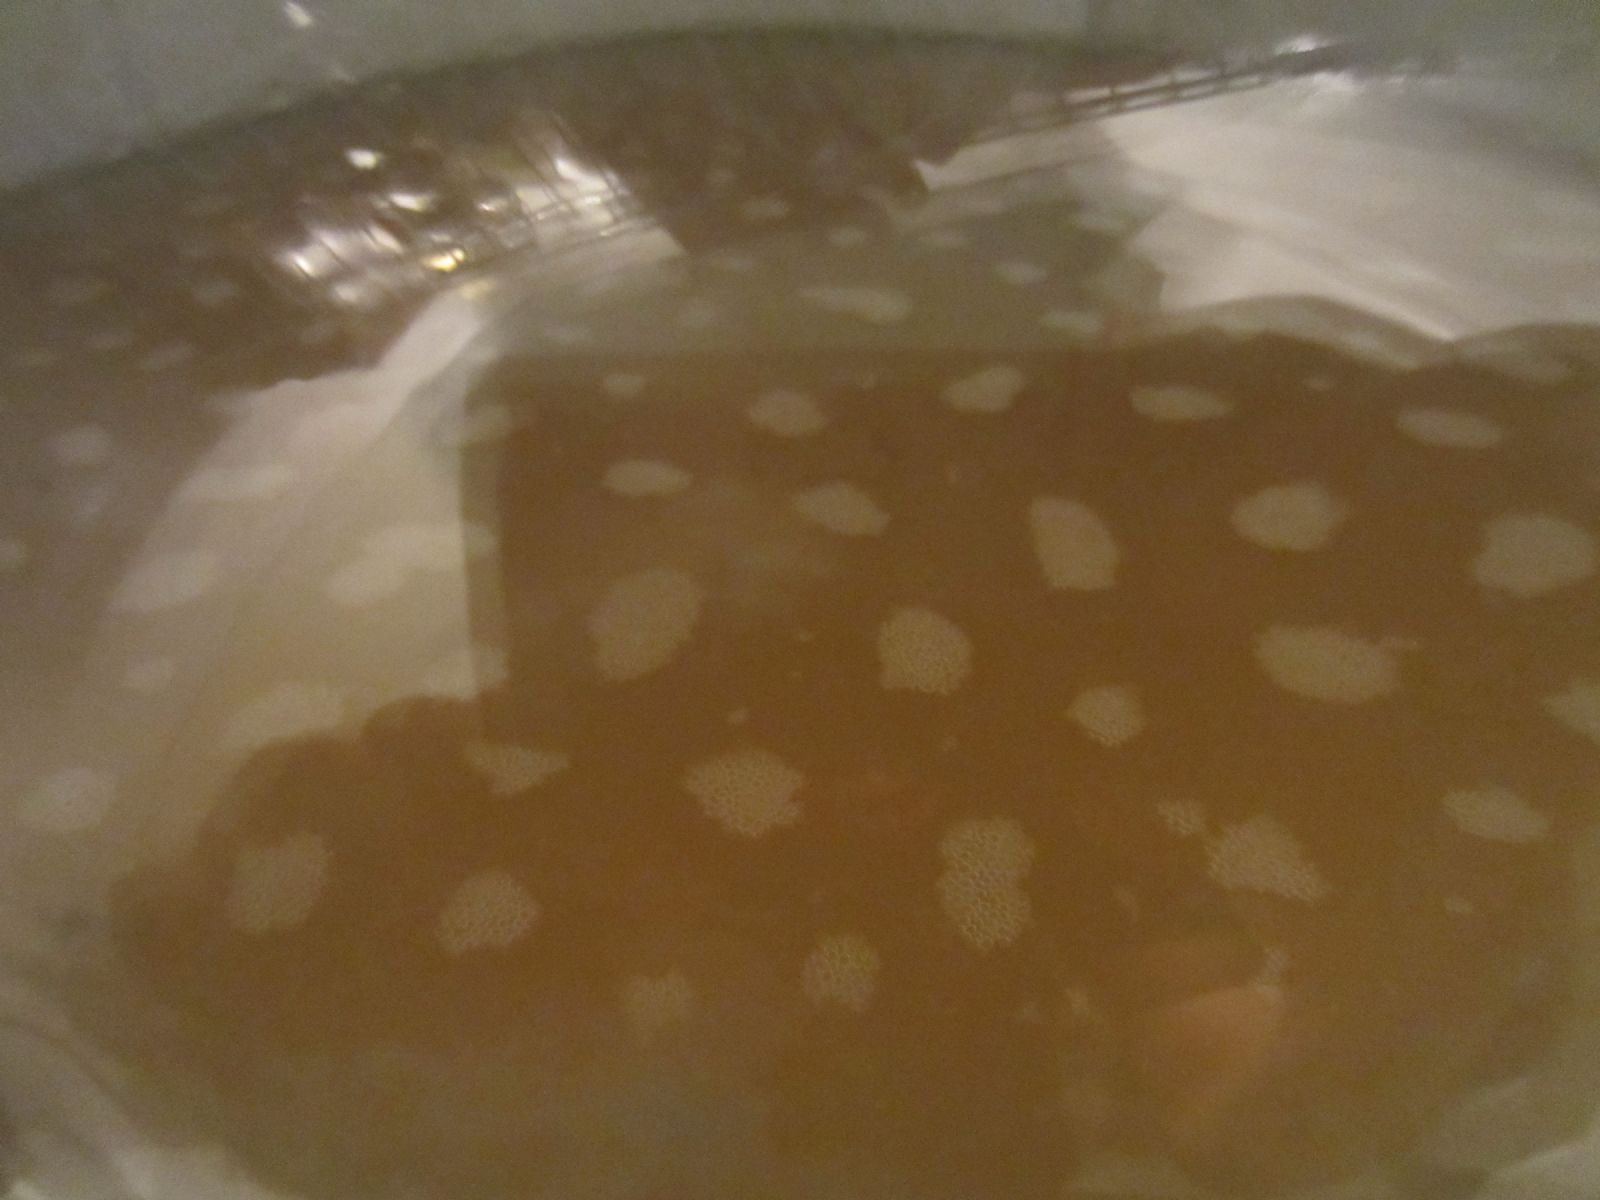 Initial Visual Signs of Yeast Growth